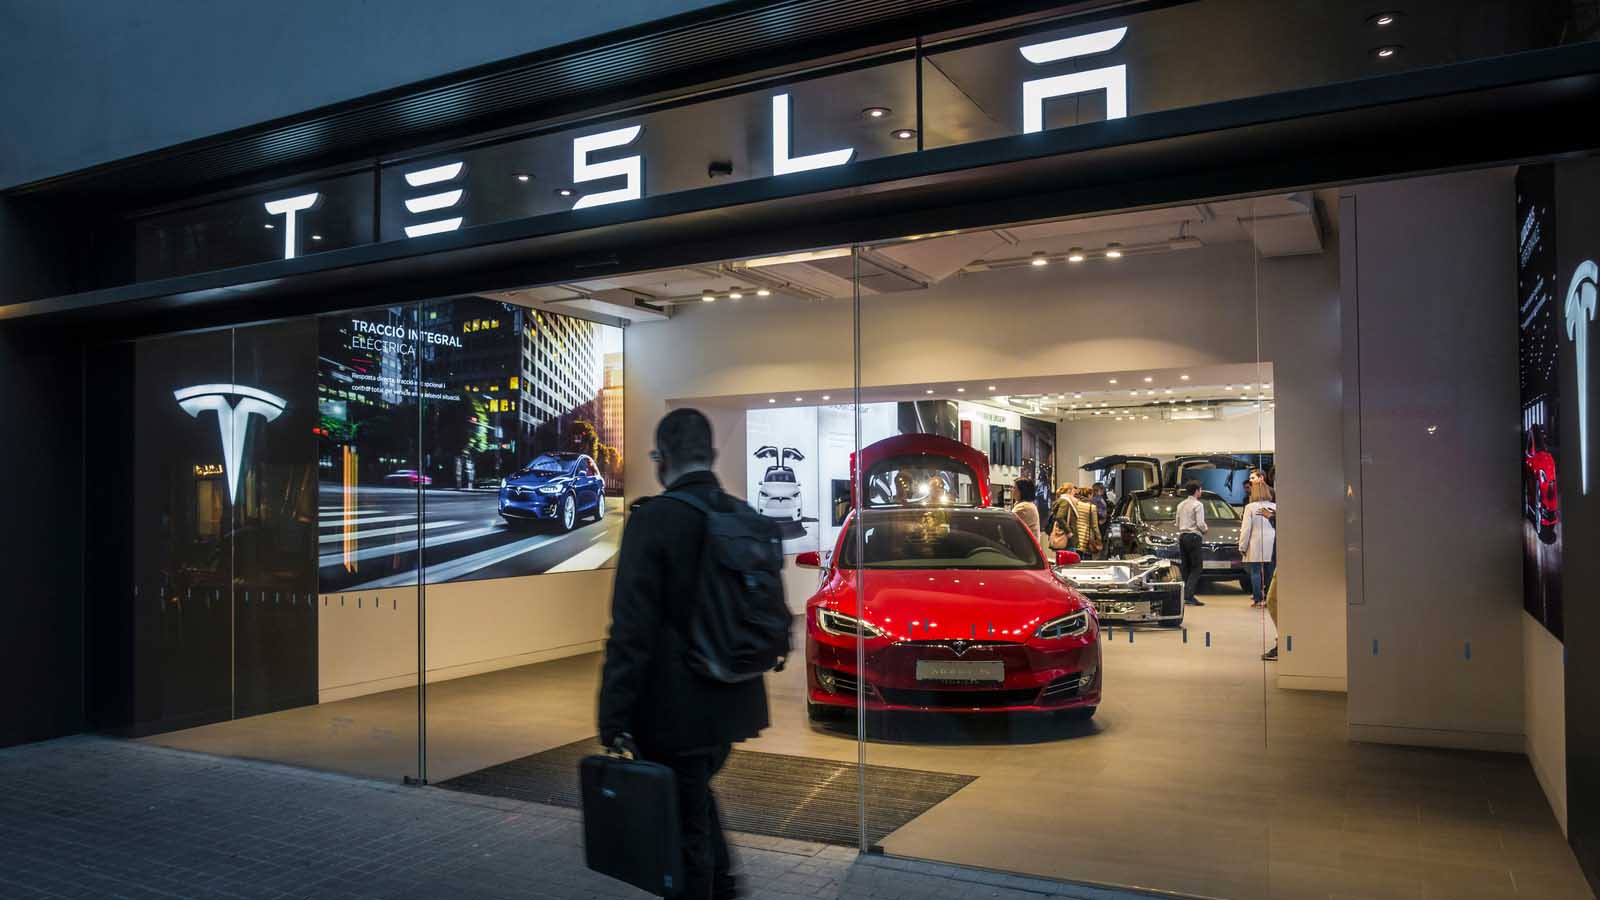 Tesla Stock: The Potential Catalysts That Could Send Shares Higher